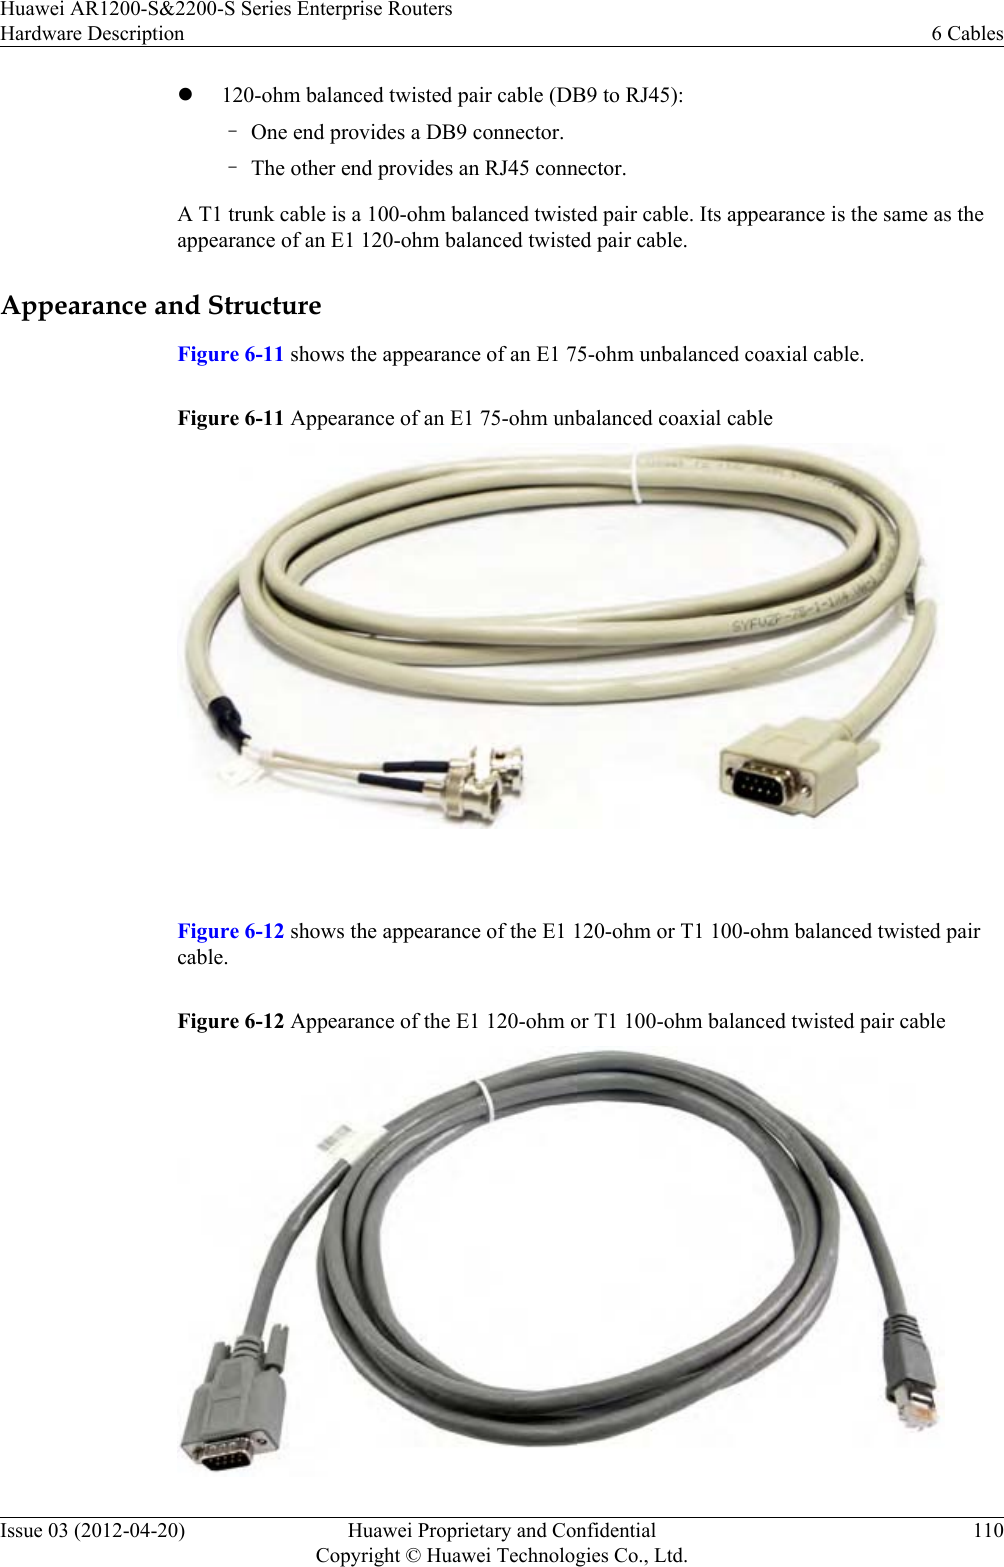 l120-ohm balanced twisted pair cable (DB9 to RJ45):–One end provides a DB9 connector.–The other end provides an RJ45 connector.A T1 trunk cable is a 100-ohm balanced twisted pair cable. Its appearance is the same as theappearance of an E1 120-ohm balanced twisted pair cable.Appearance and StructureFigure 6-11 shows the appearance of an E1 75-ohm unbalanced coaxial cable.Figure 6-11 Appearance of an E1 75-ohm unbalanced coaxial cable Figure 6-12 shows the appearance of the E1 120-ohm or T1 100-ohm balanced twisted paircable.Figure 6-12 Appearance of the E1 120-ohm or T1 100-ohm balanced twisted pair cableHuawei AR1200-S&amp;2200-S Series Enterprise RoutersHardware Description 6 CablesIssue 03 (2012-04-20) Huawei Proprietary and ConfidentialCopyright © Huawei Technologies Co., Ltd.110